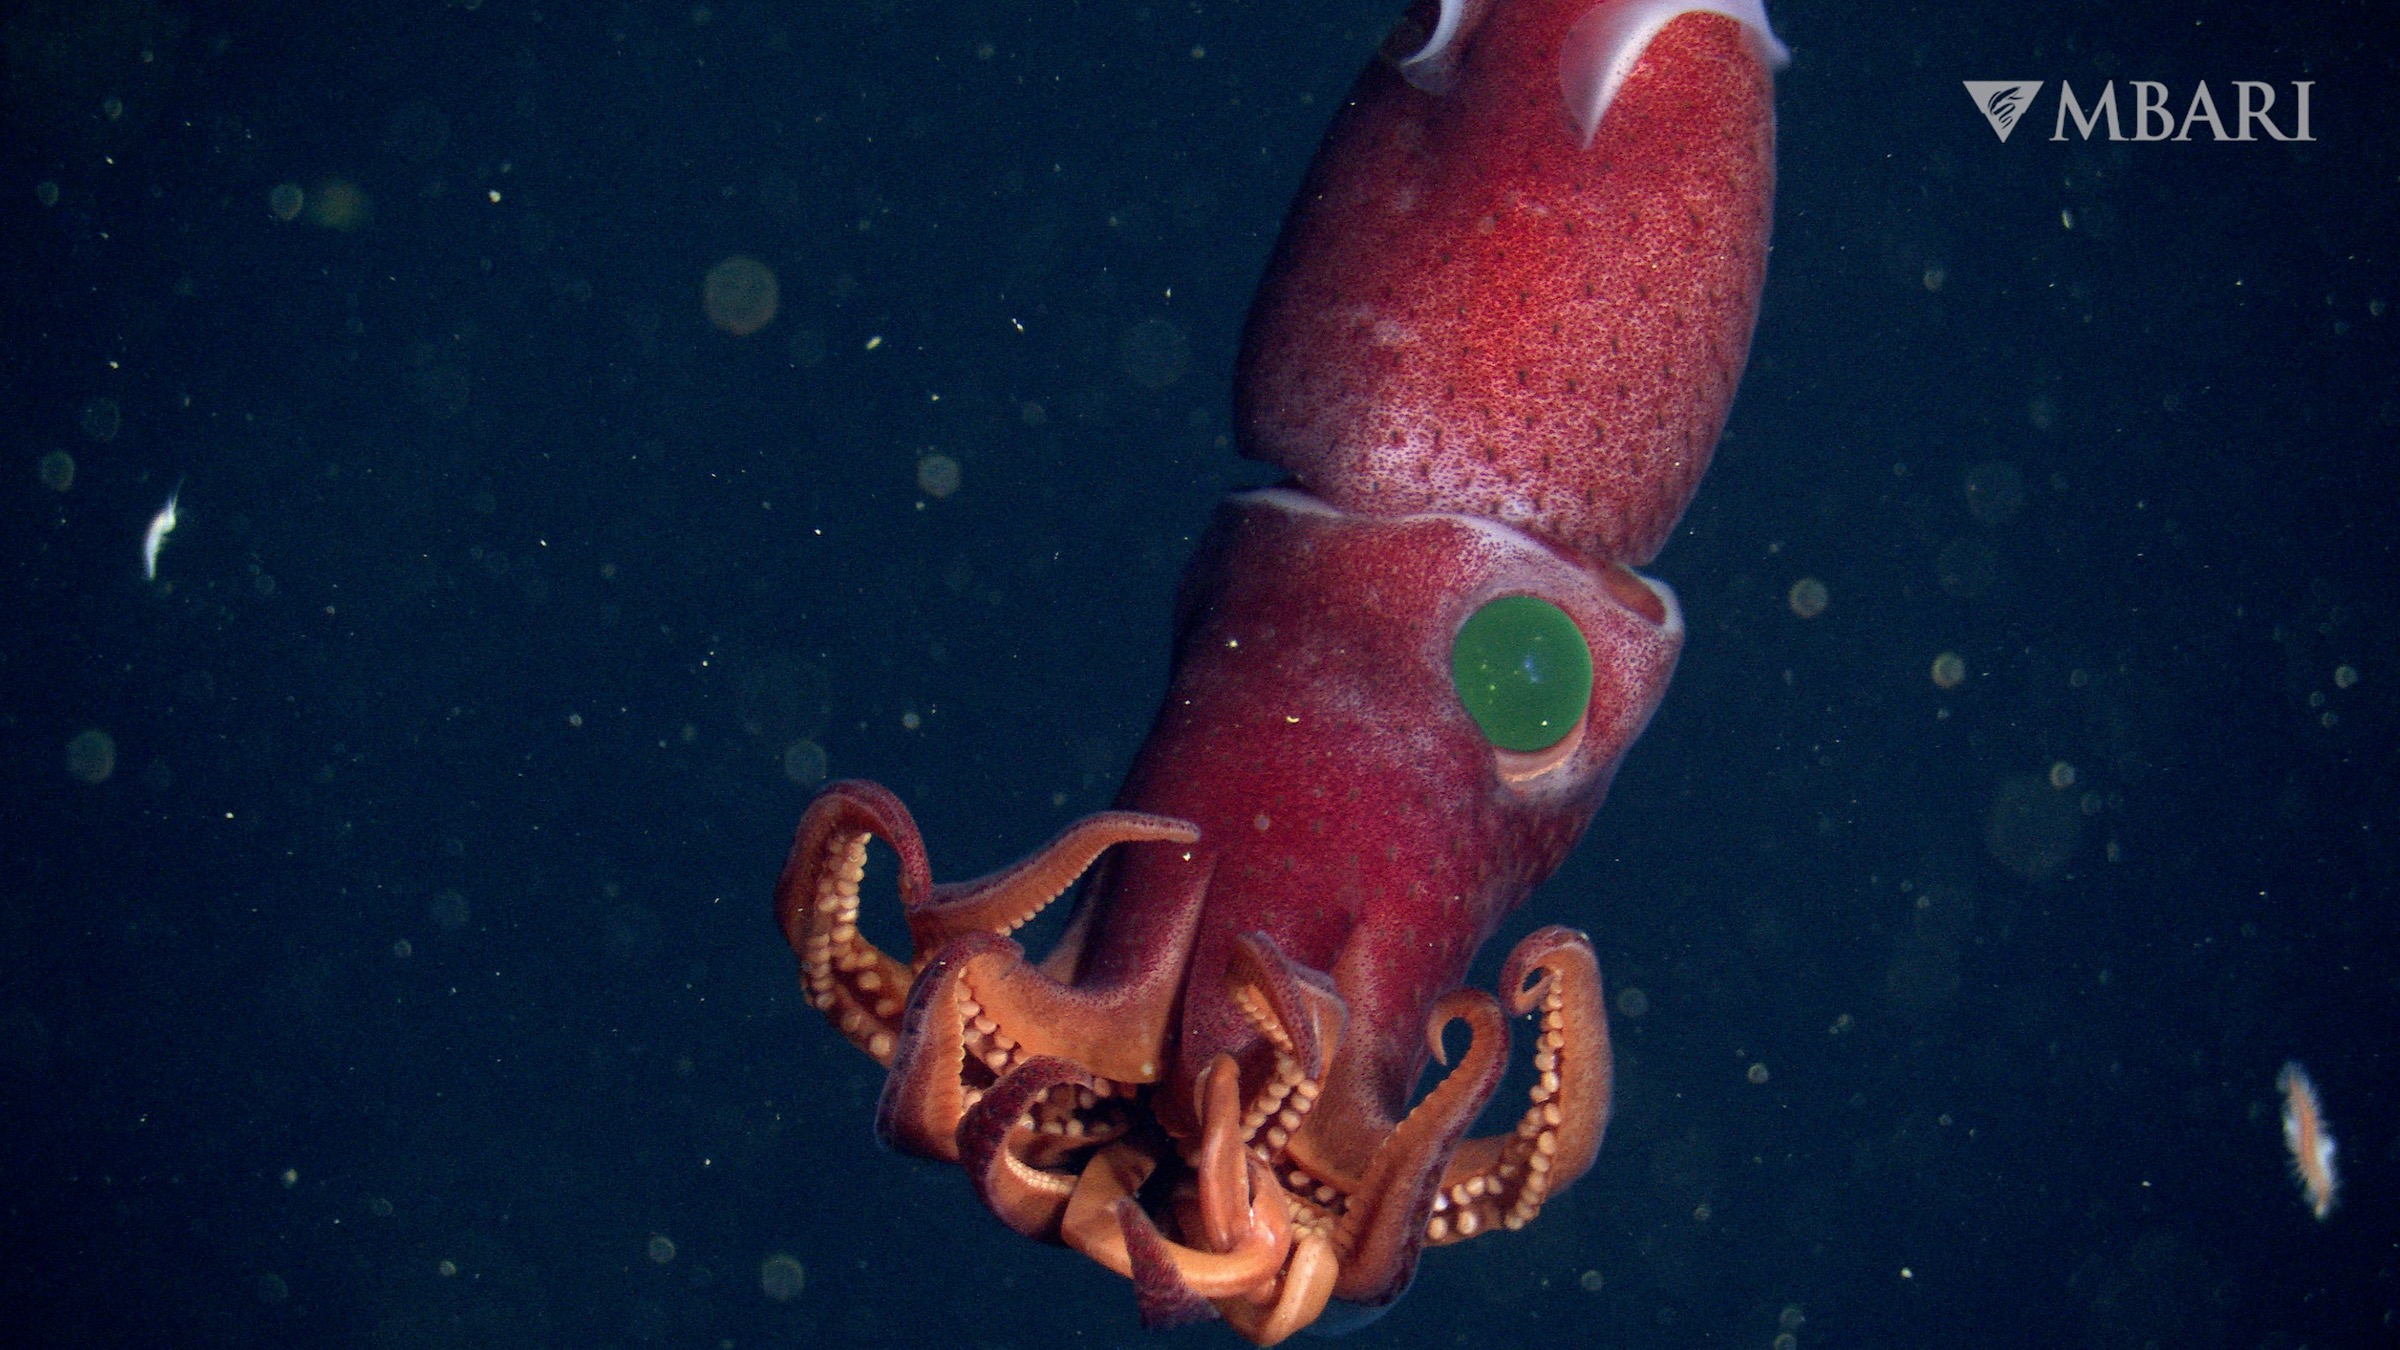 The strawberry squid has a giant left eye and a small right eye.